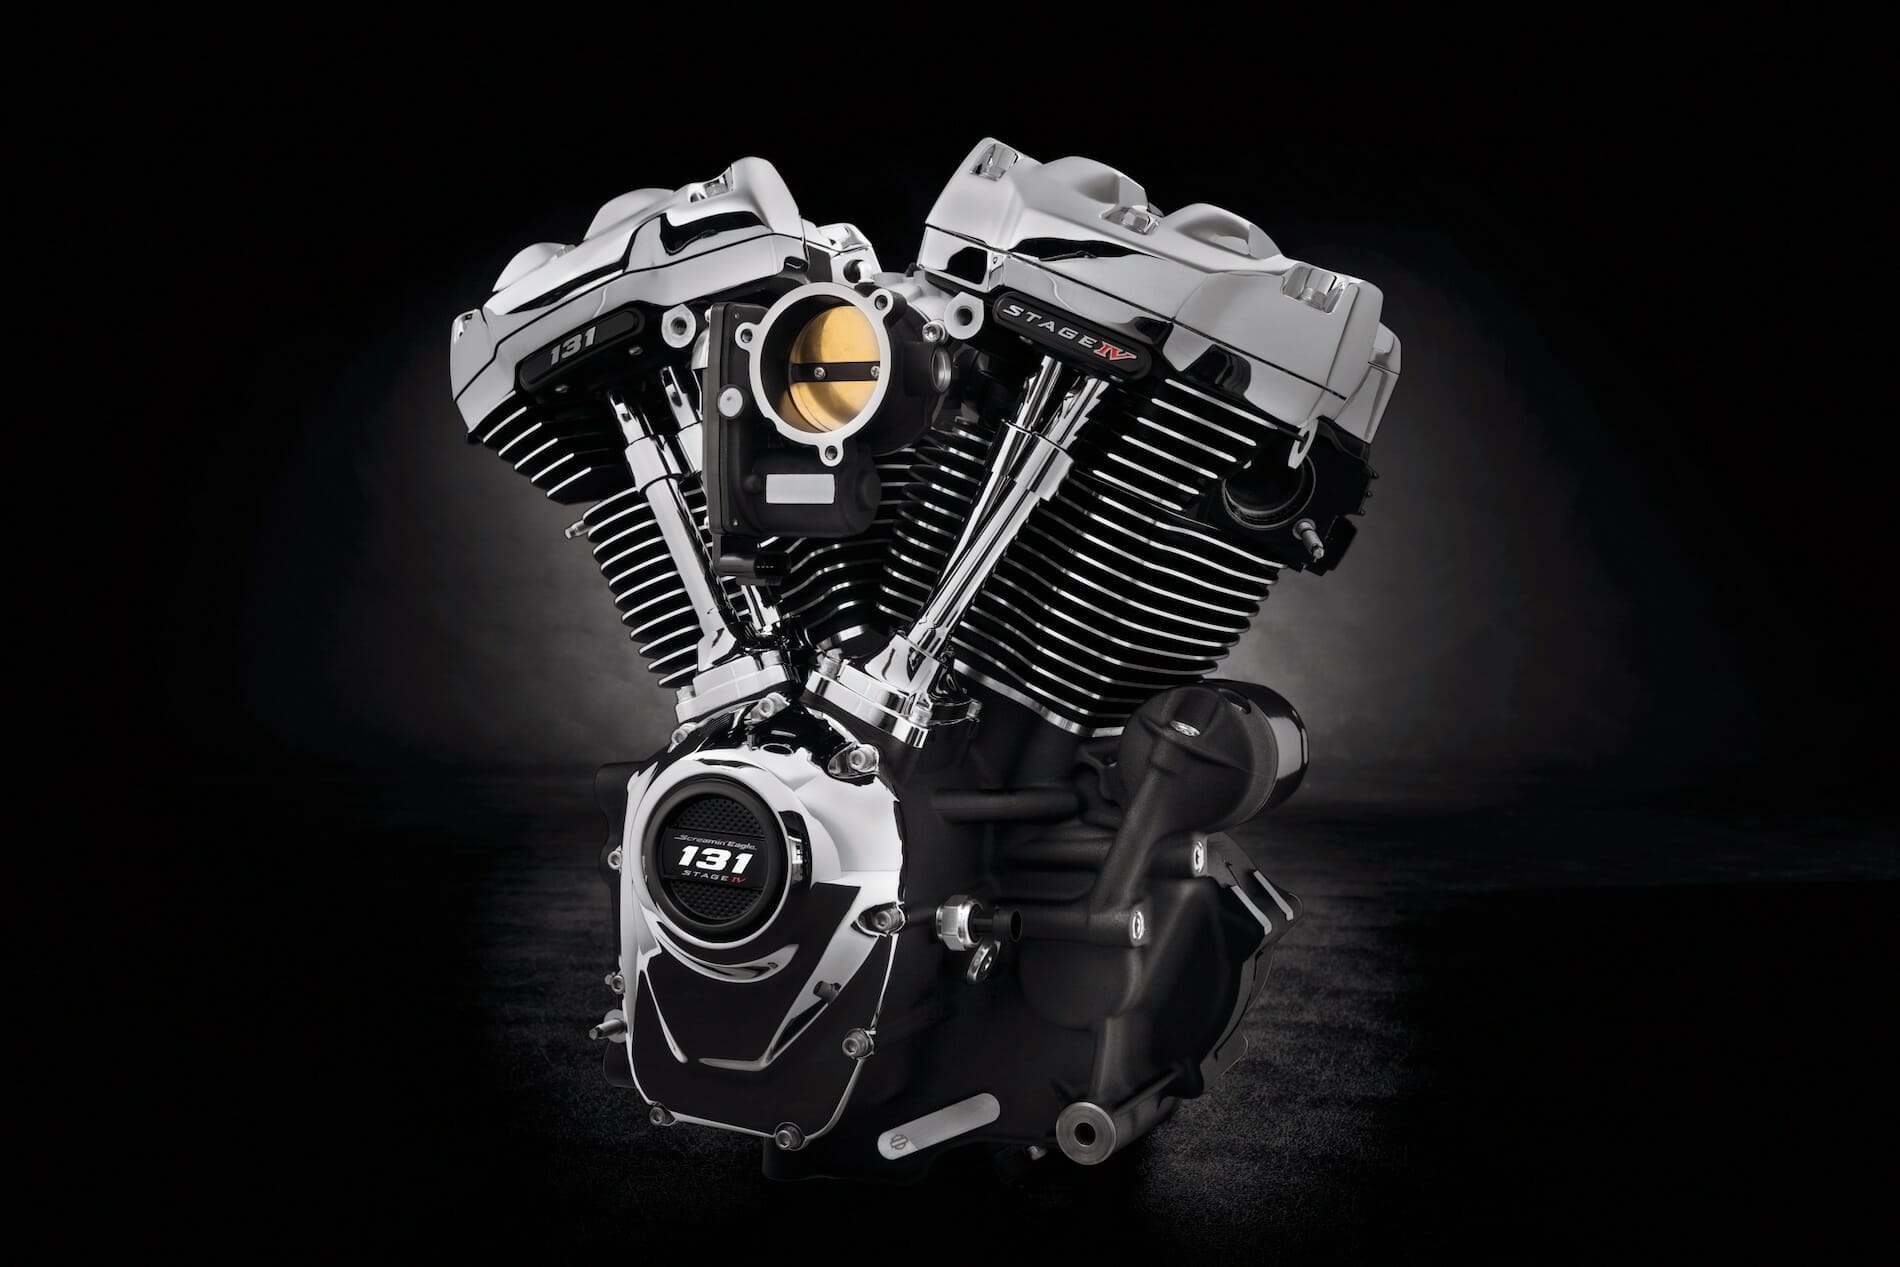 New and stronger Harley-Davidson engine - Screamin` Eagle 131 Crate engine
- also in the APP MOTORCYCLE NEWS